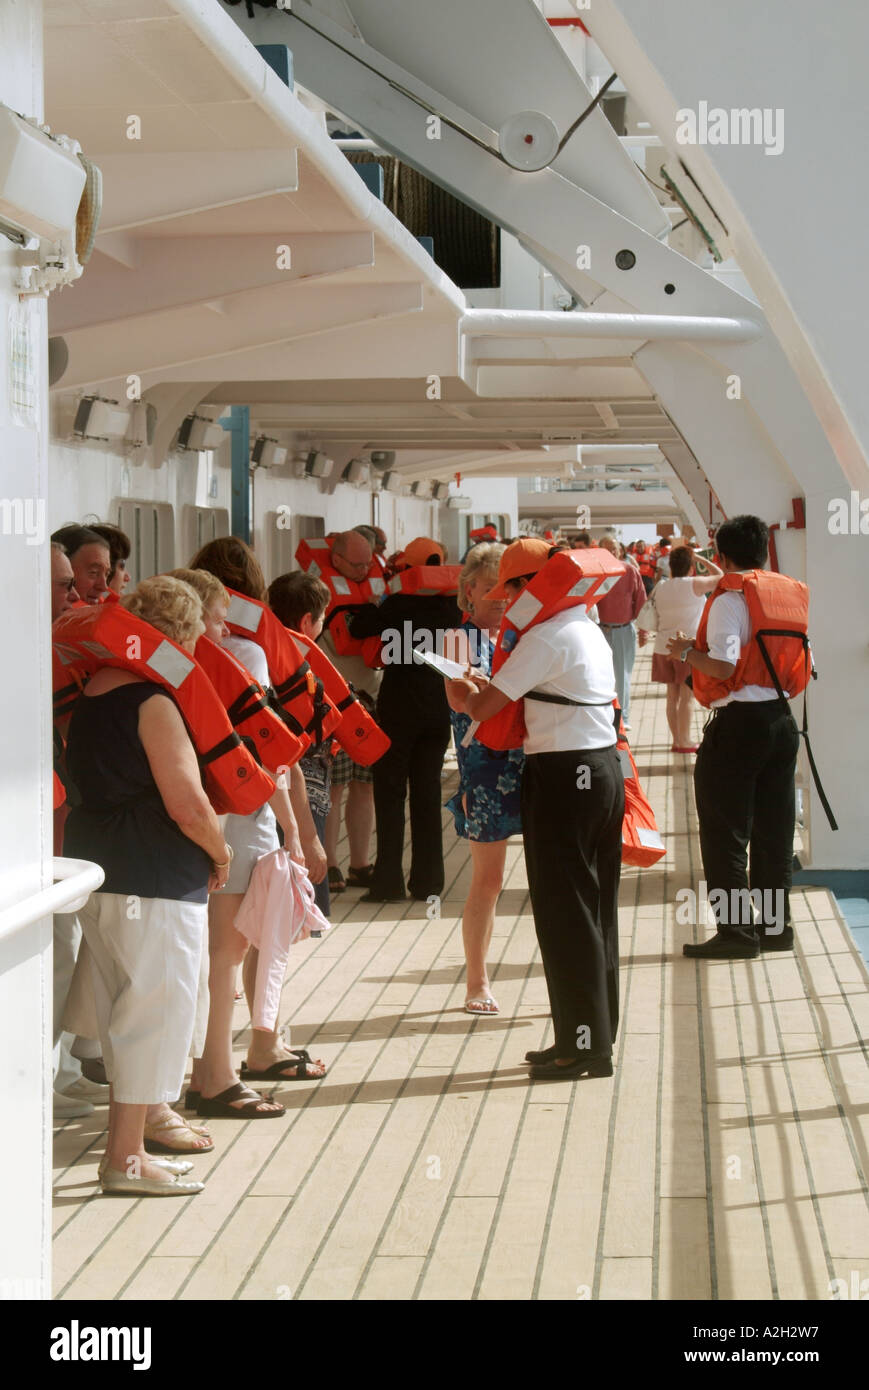 Mediterranean cruise ship passengers on board cruise liner at sea in compulsory practice of lifeboat evacuation procedures to abandon ship Stock Photo